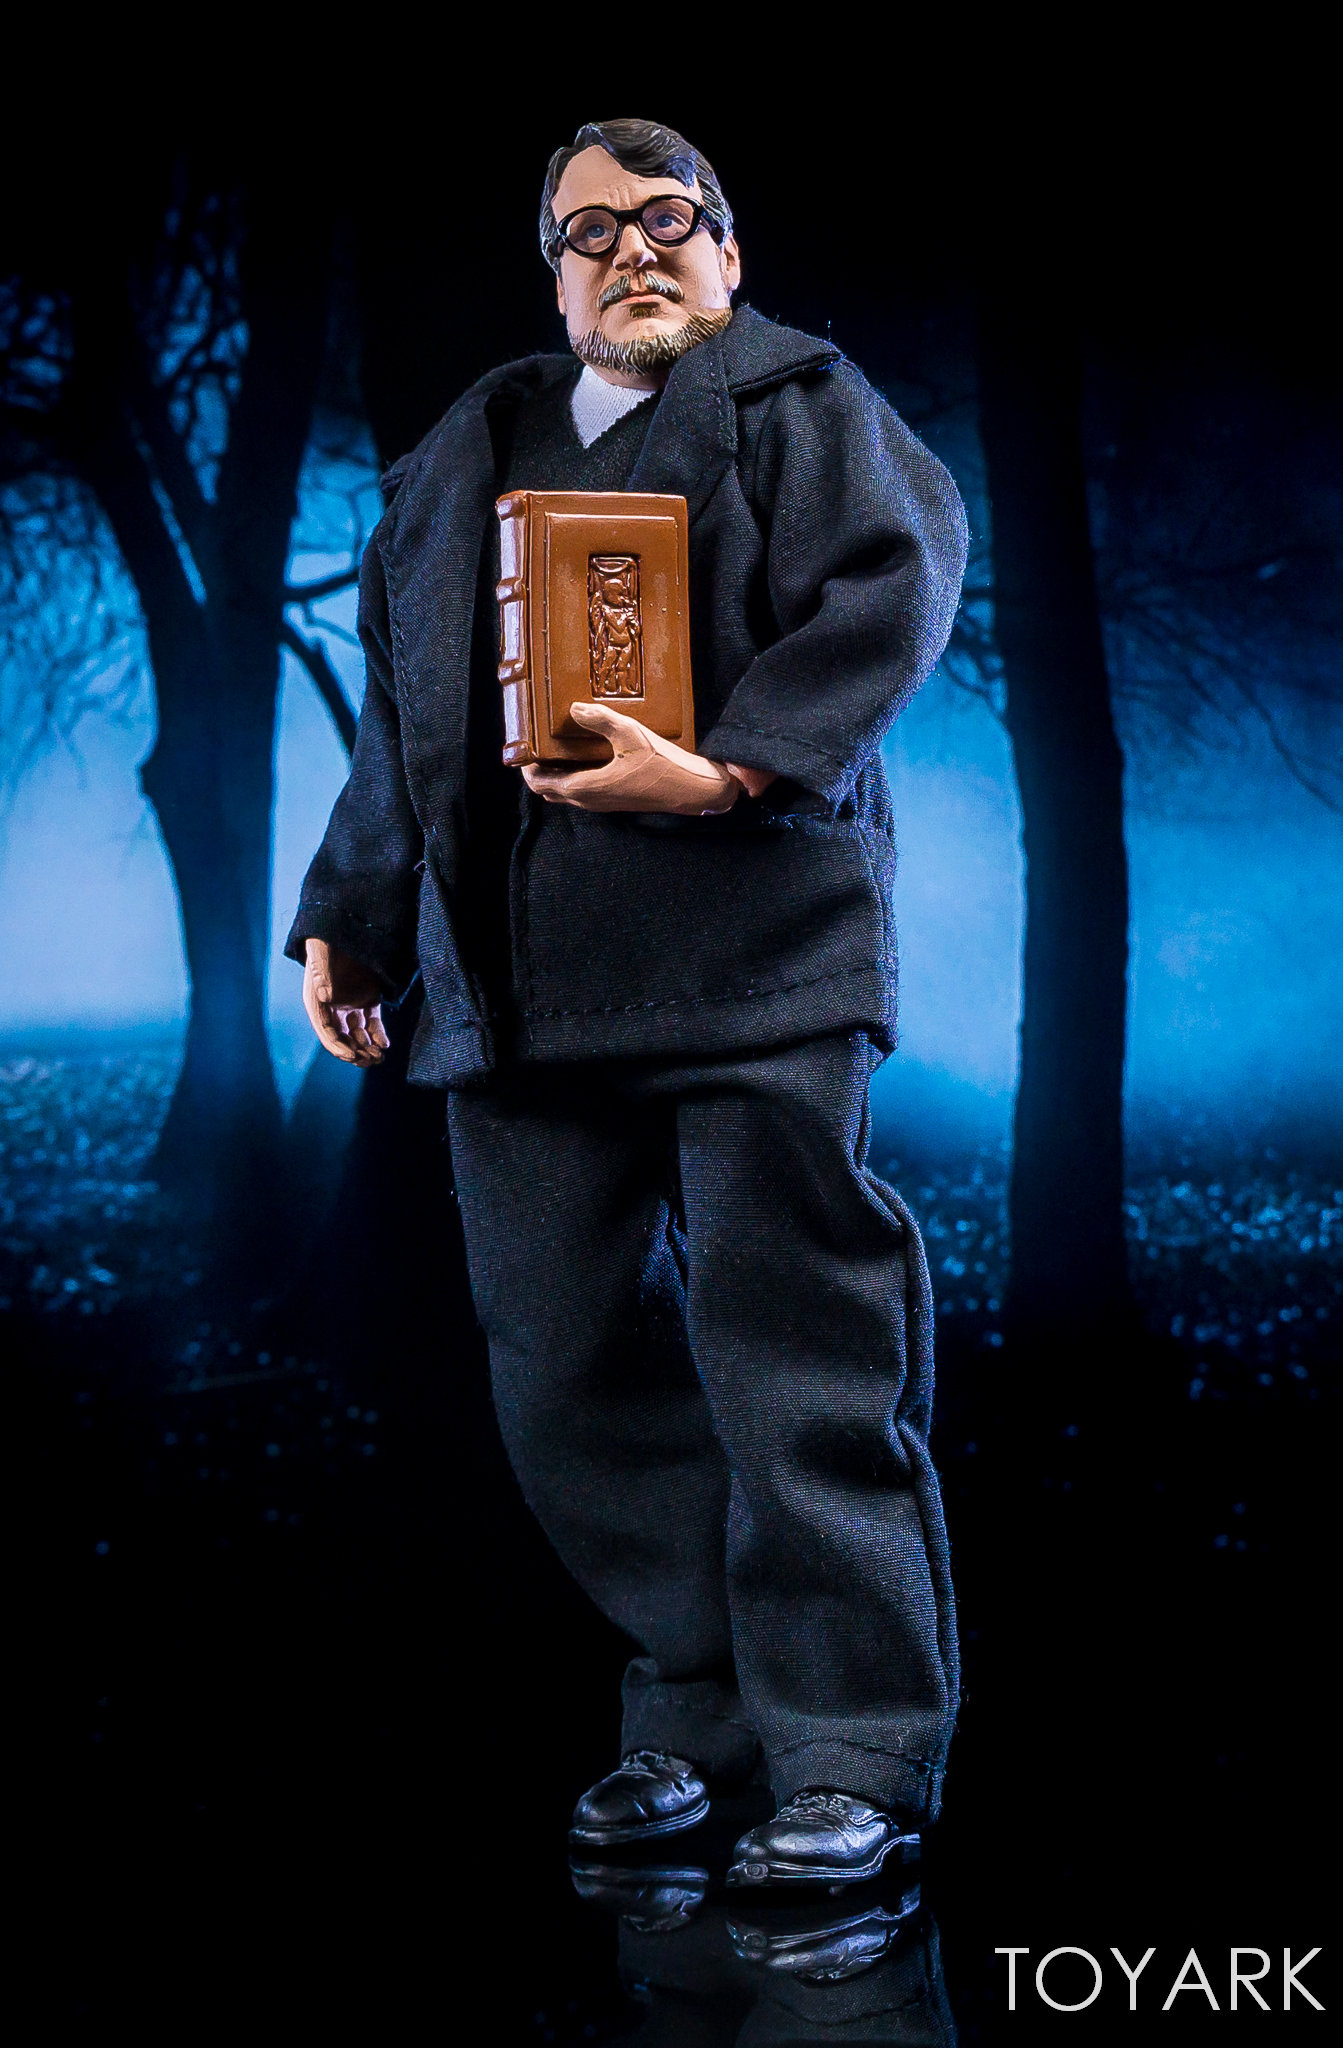 Guillermo Del Toro Gets His Own Action Figure